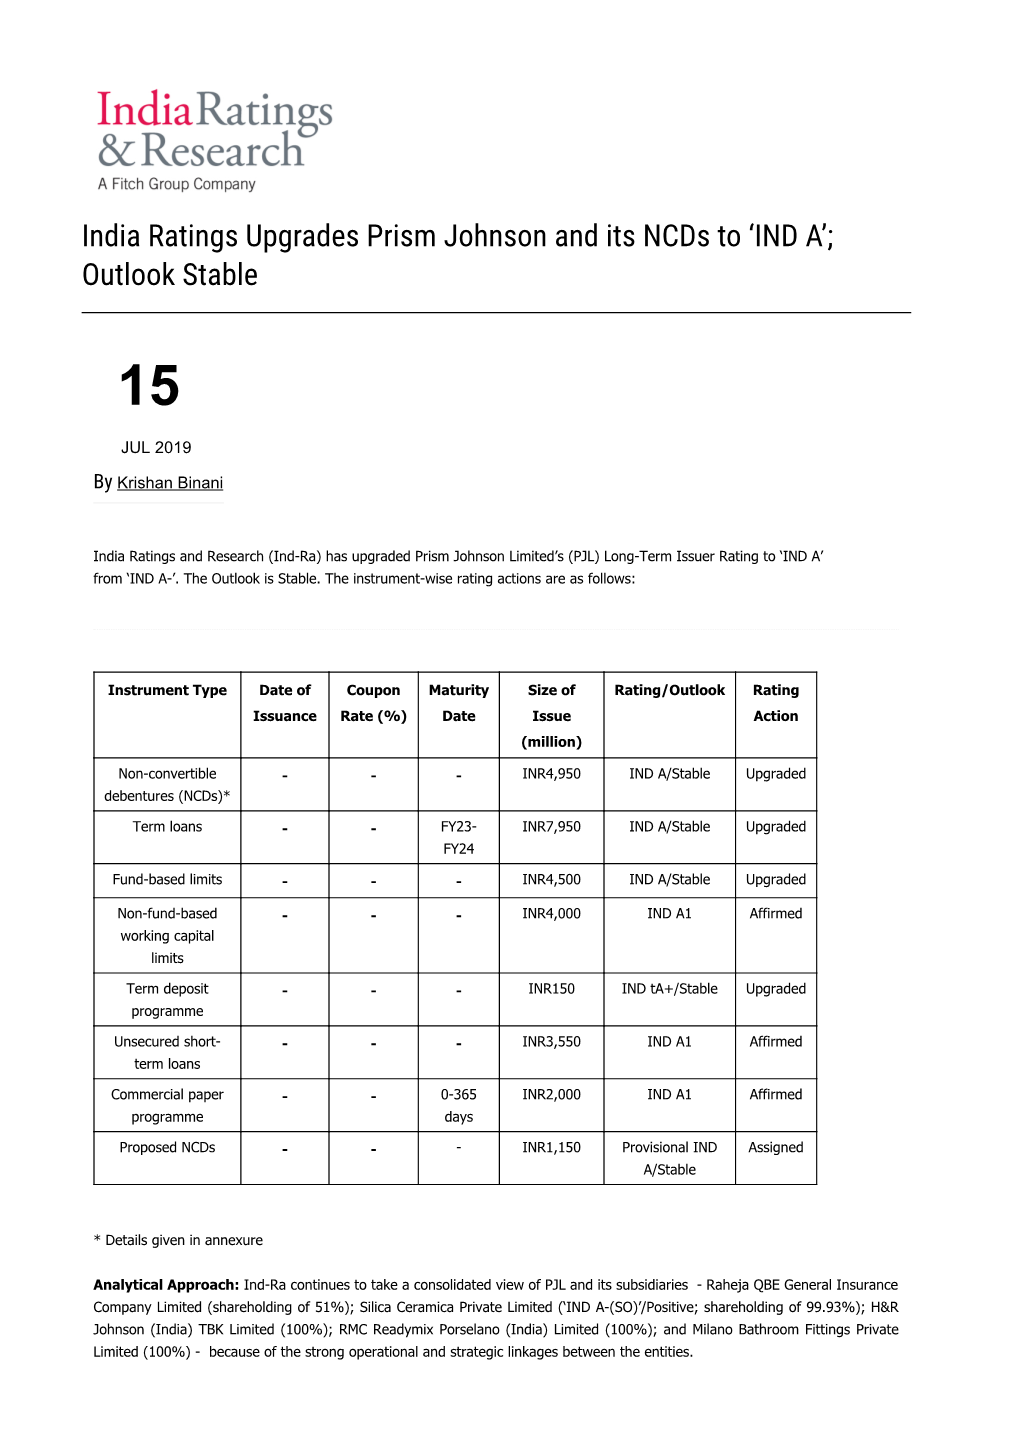 India Ratings Upgrades Prism Johnson and Its Ncds to 'IND A